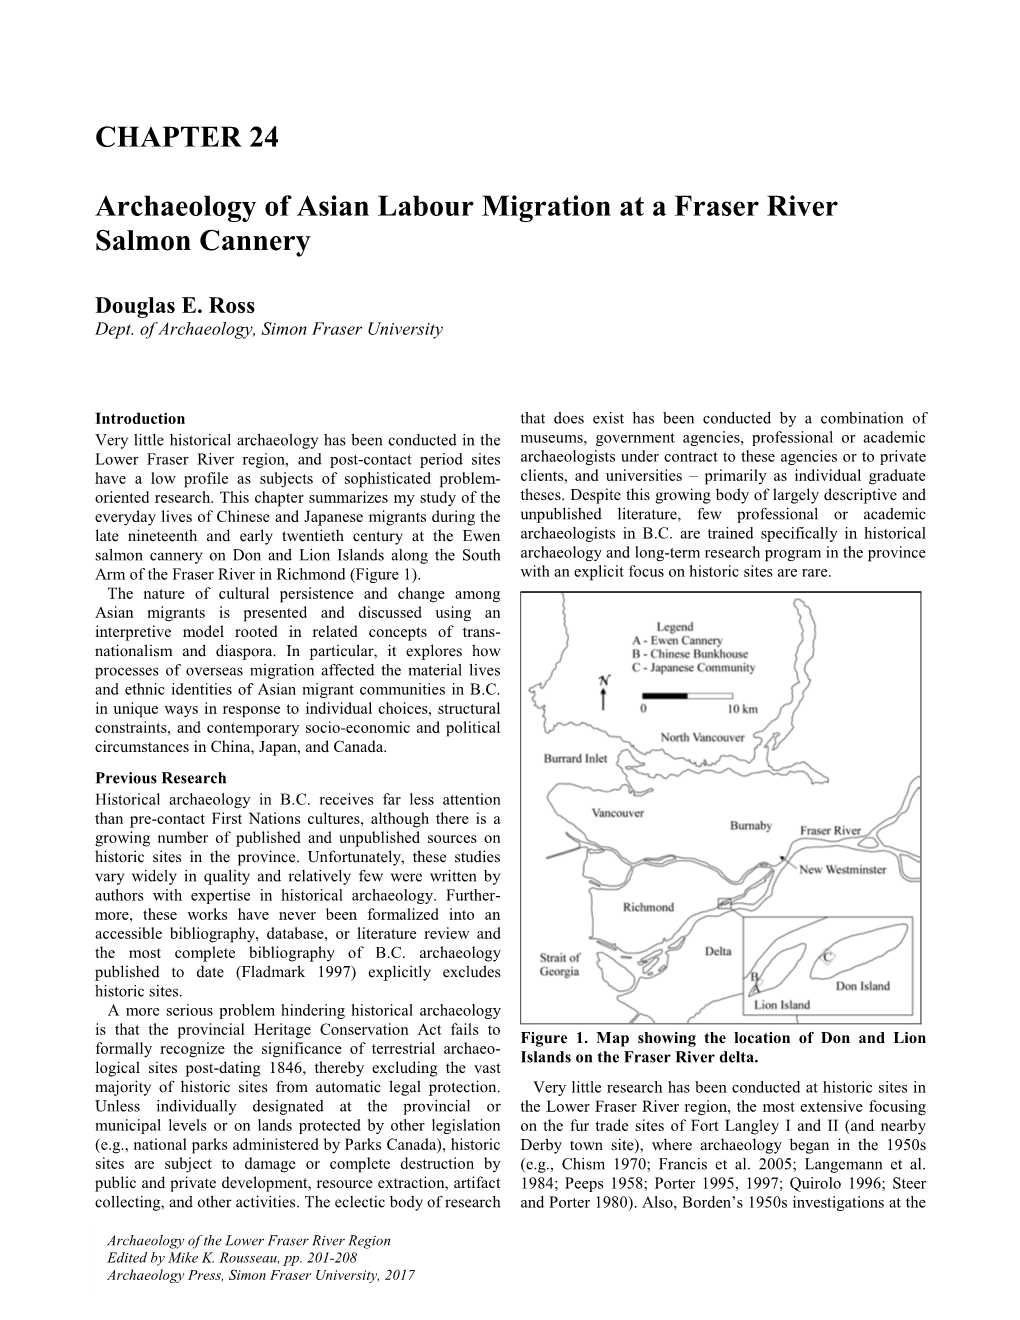 CHAPTER 24 Archaeology of Asian Labour Migration at a Fraser River